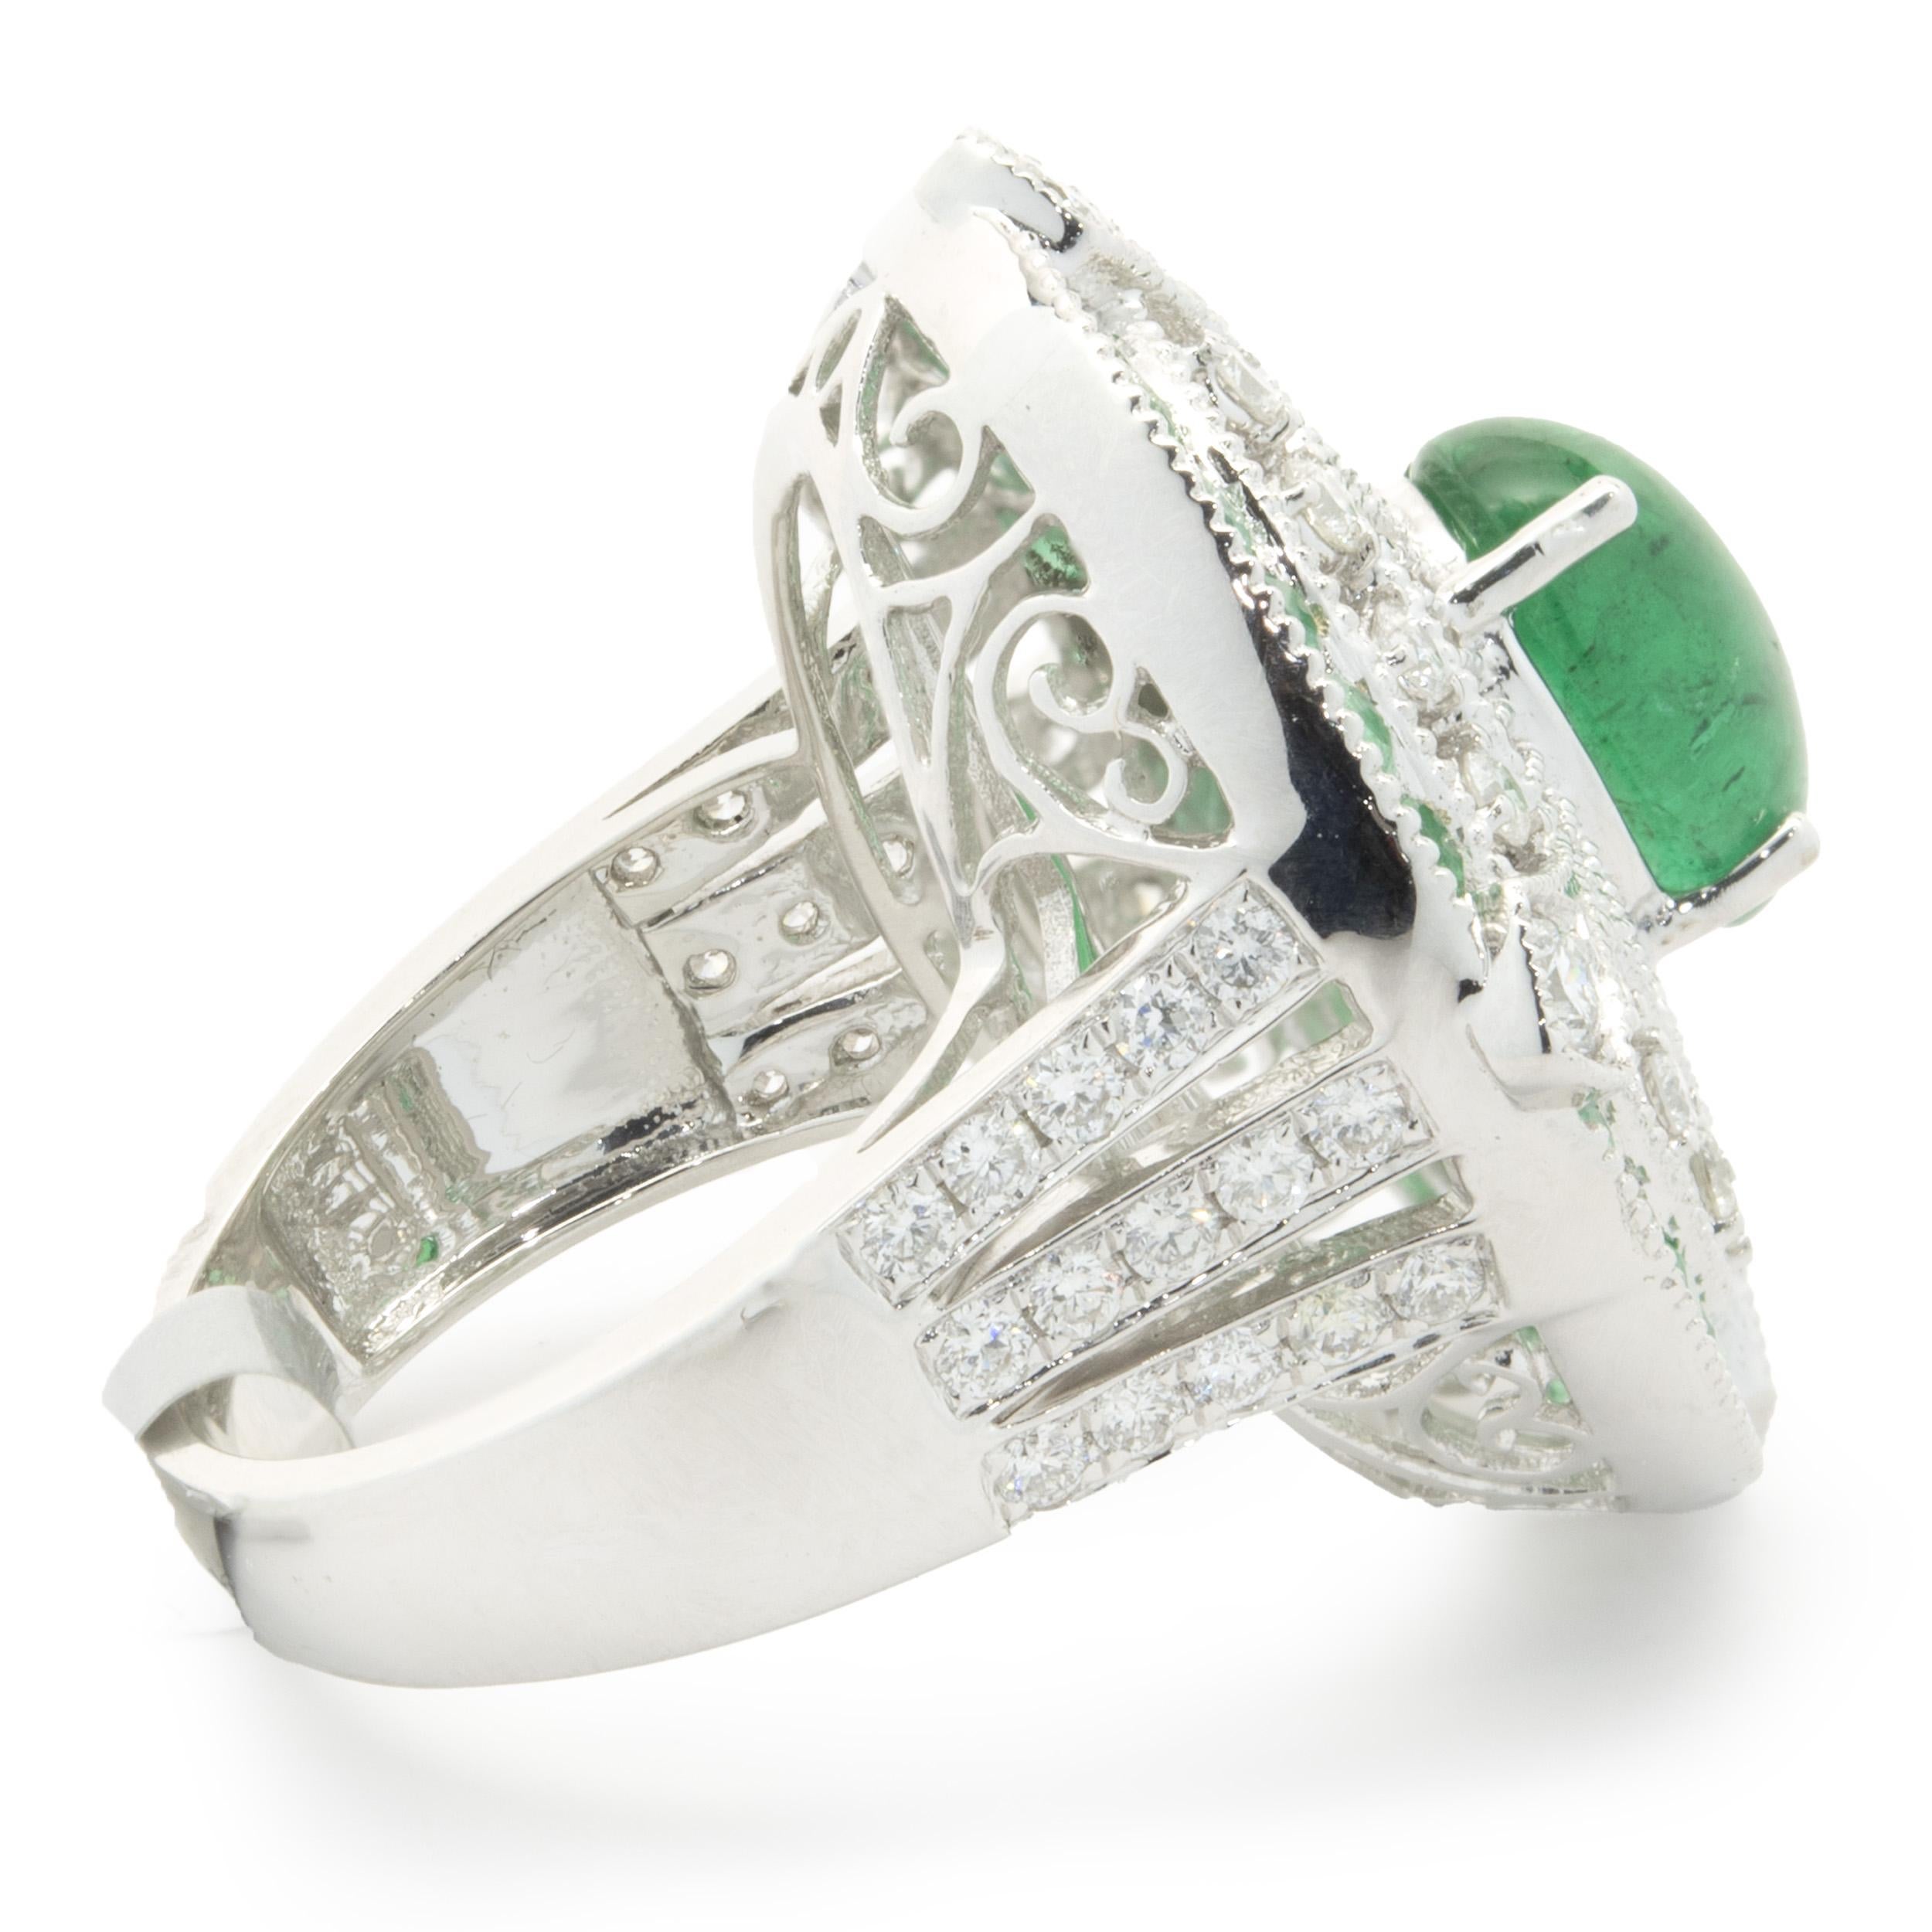 18 Karat White Gold Cabochon Cut Emerald and Diamond Ornate Cocktail Ring In Excellent Condition For Sale In Scottsdale, AZ